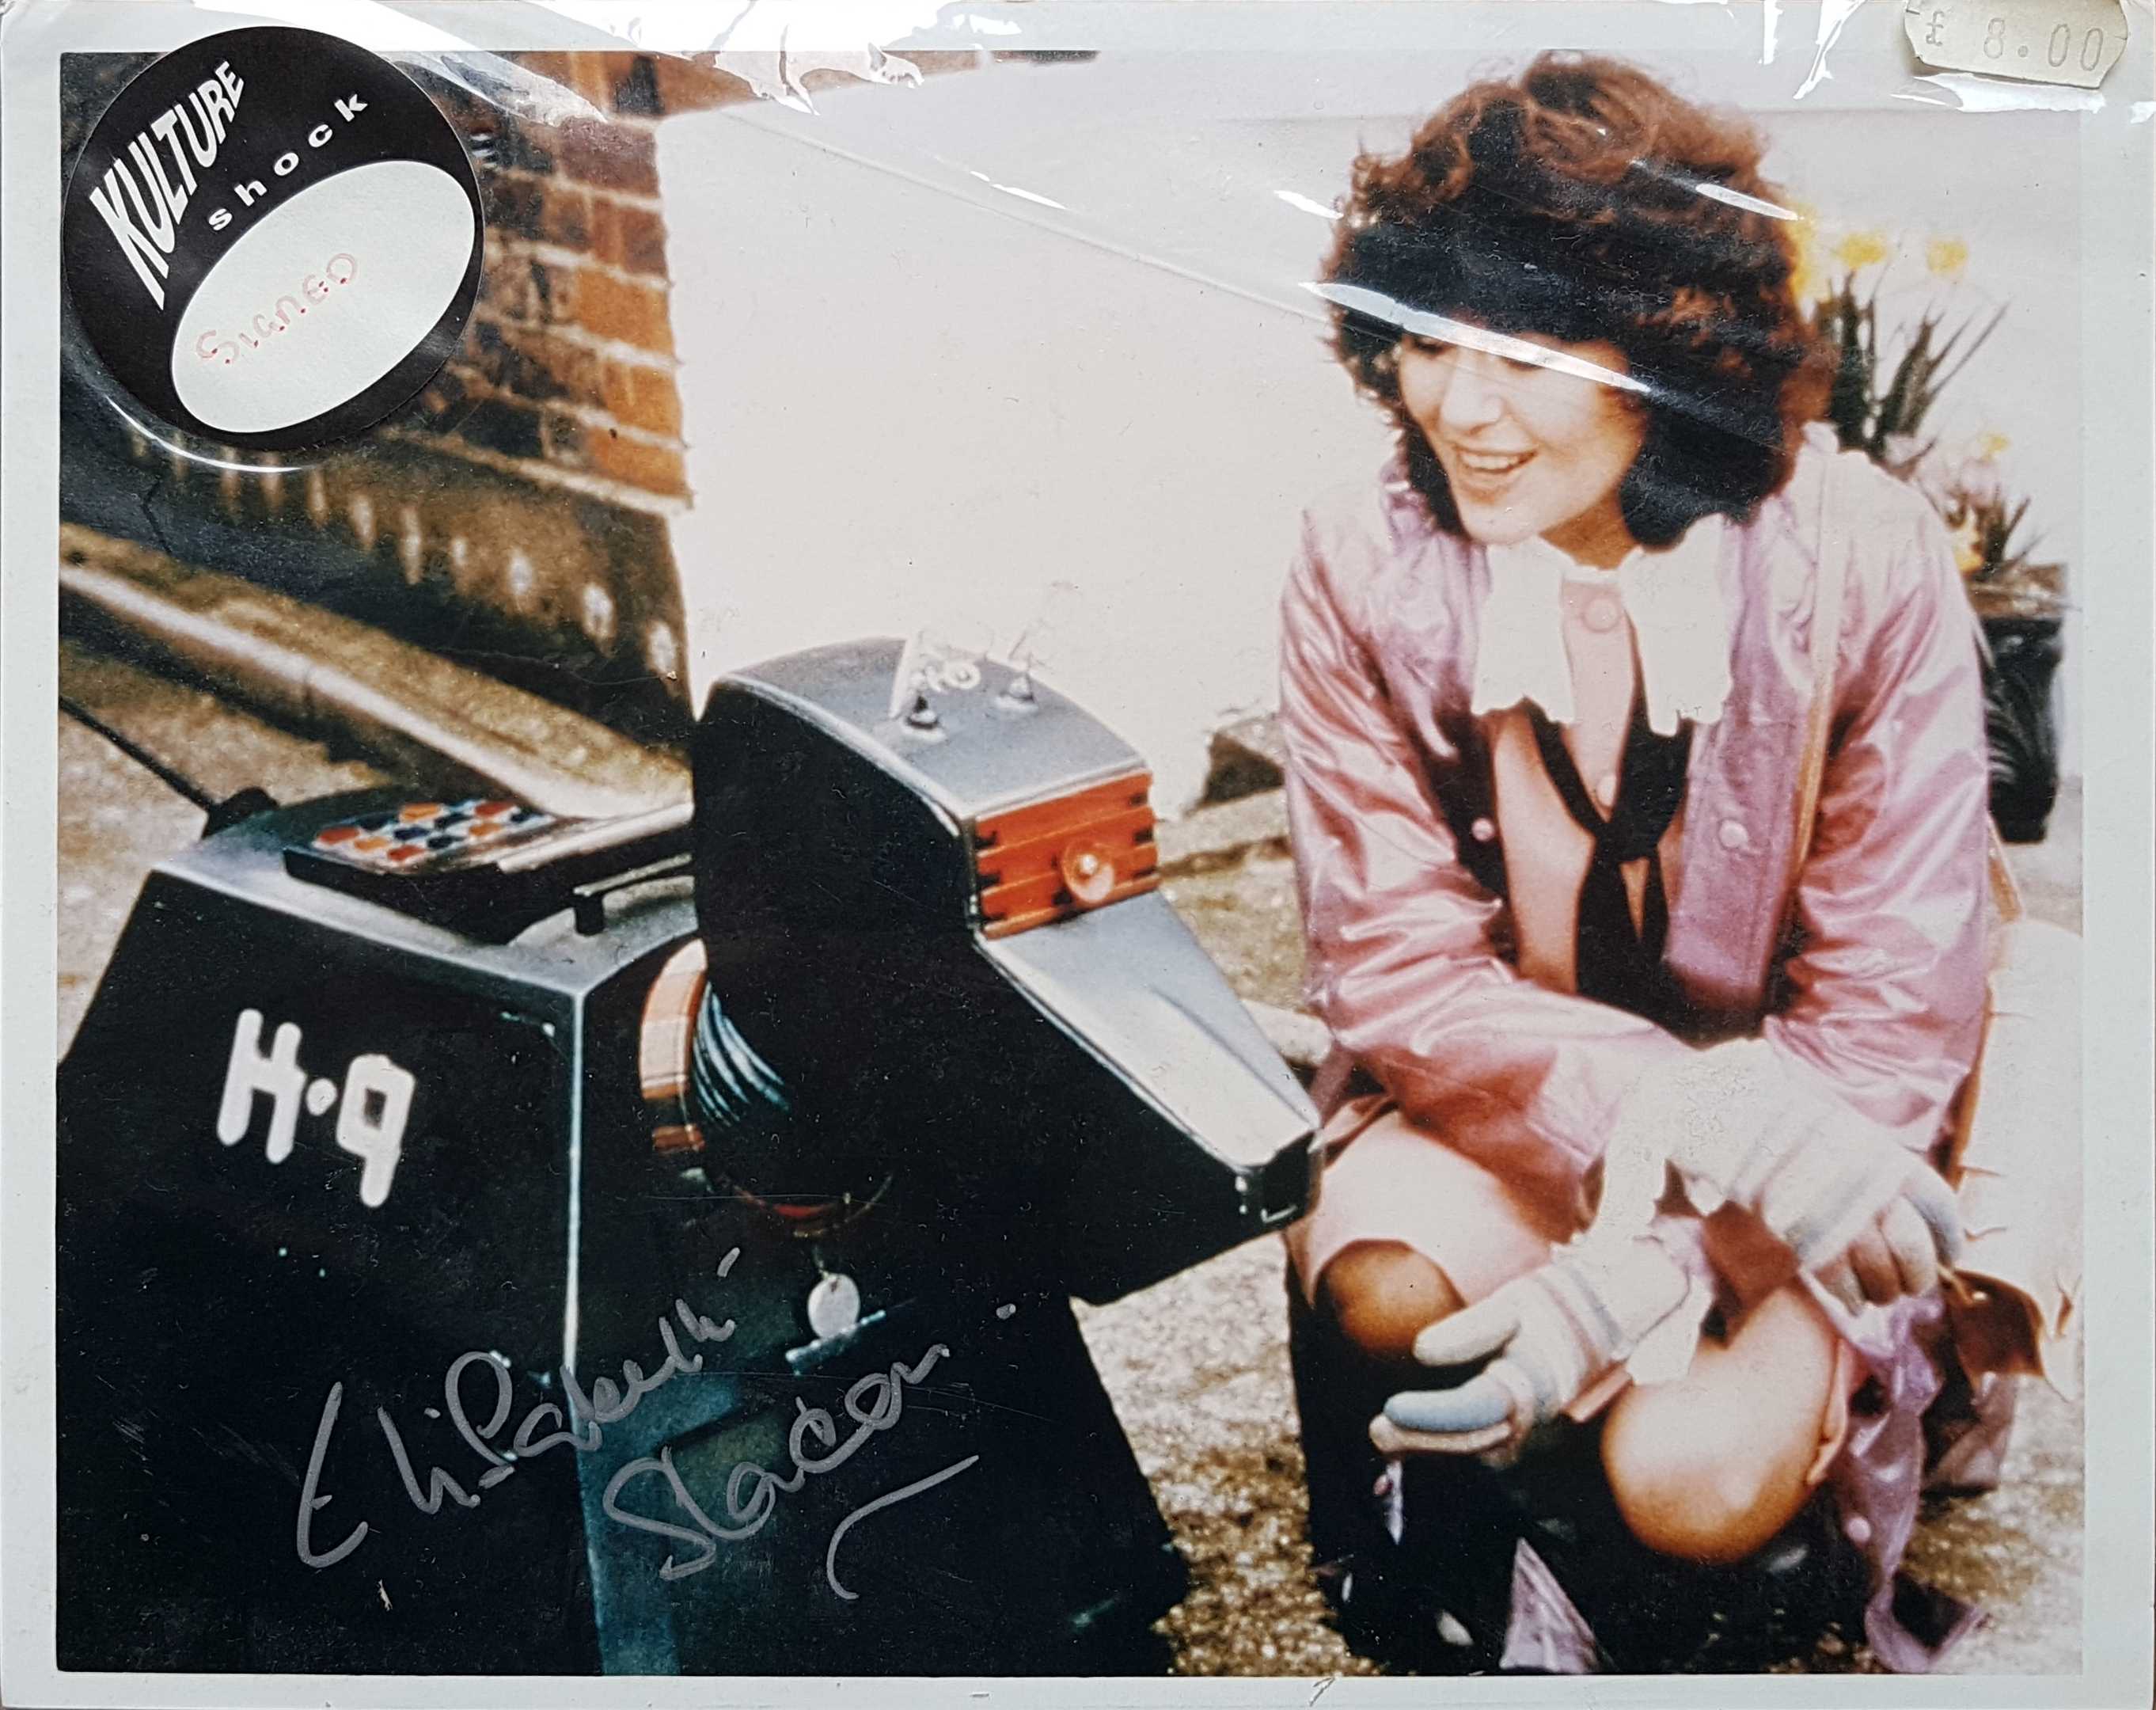 Picture of Pictures-ESK9 Elizabeth Sladen and K9 by artist Unknown from the BBC records and Tapes library